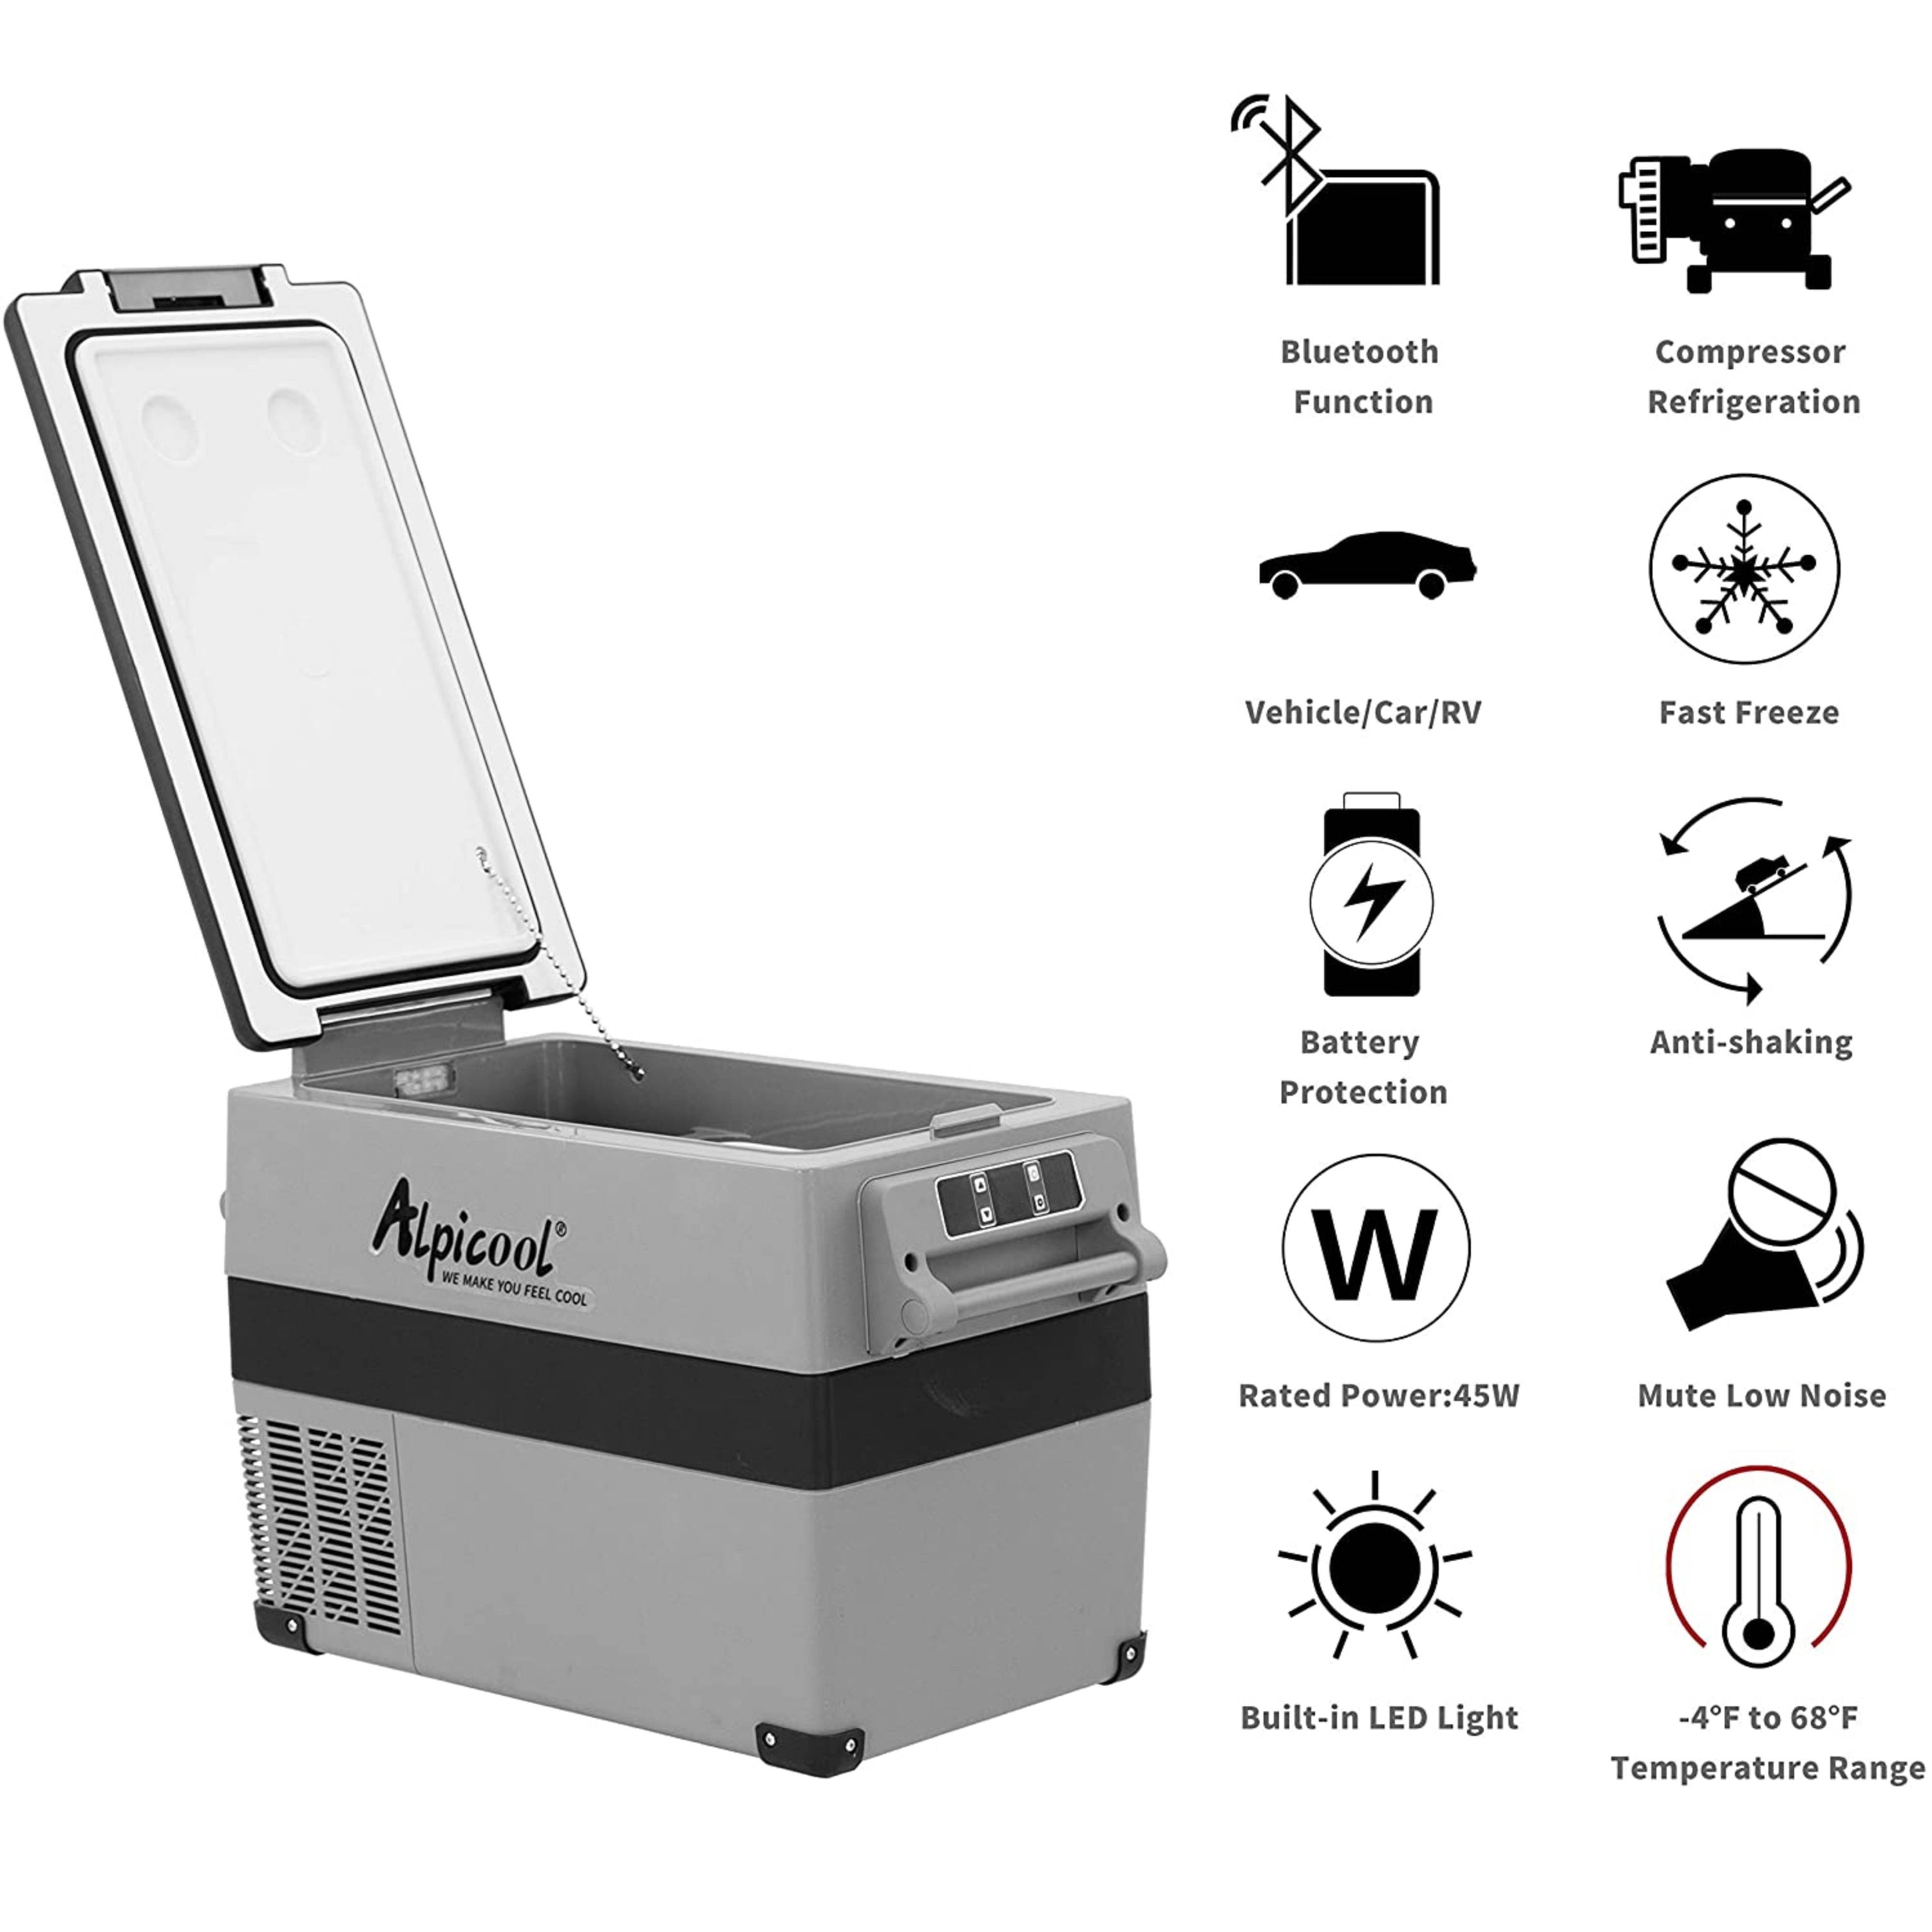 Alpicool LGCF55 - Dual-Zone 52 Quart Car Refrigerator, Bluetooth App, Versatile for Road Trips & Camping with Cup Holders